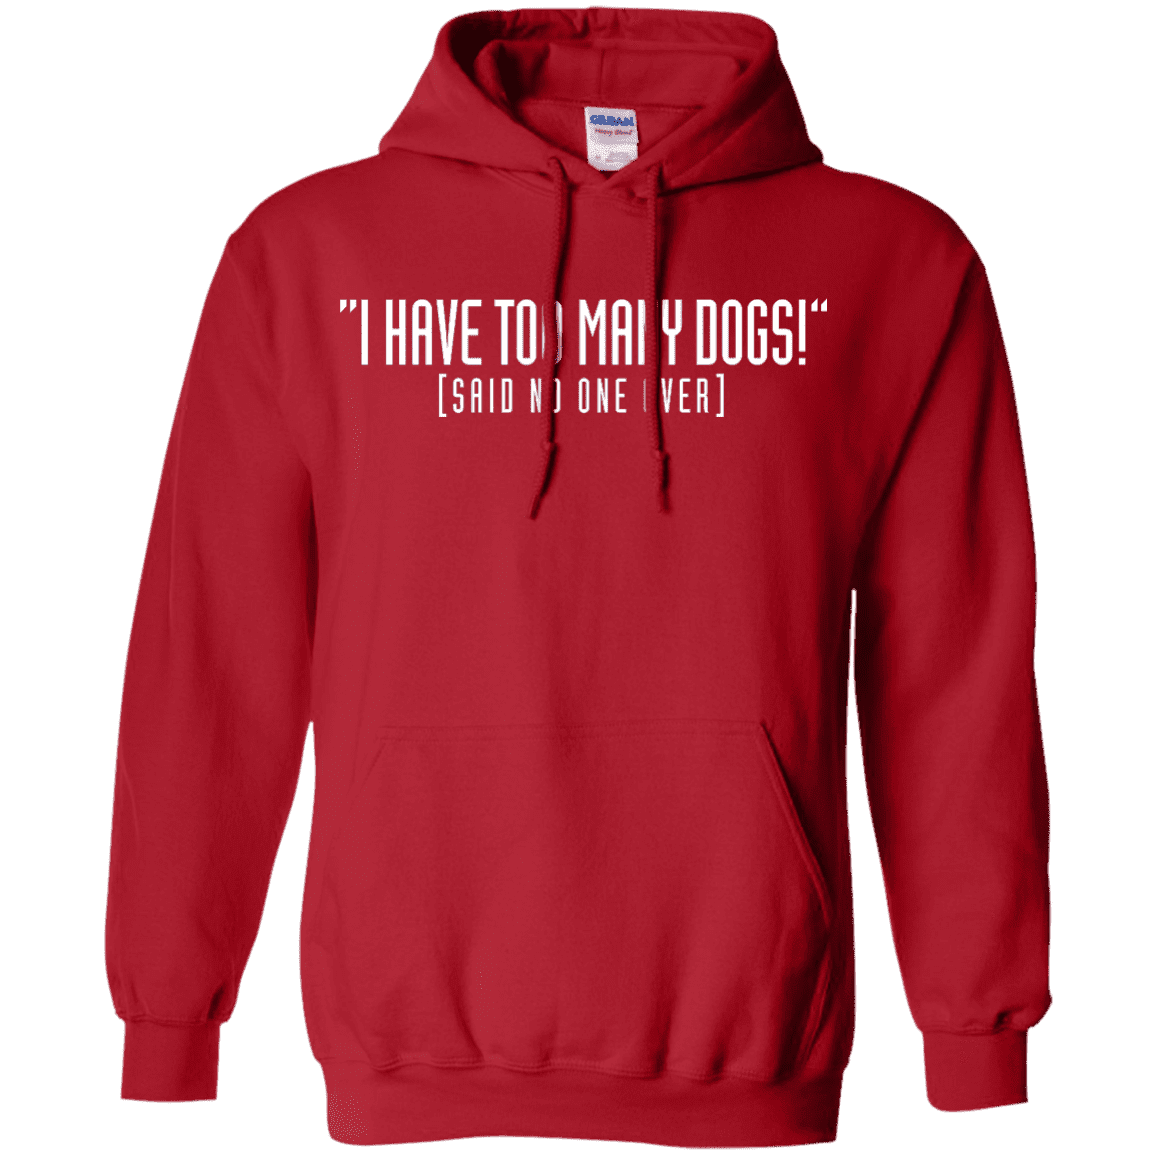 I Have Too Many Dogs - Hoodie.